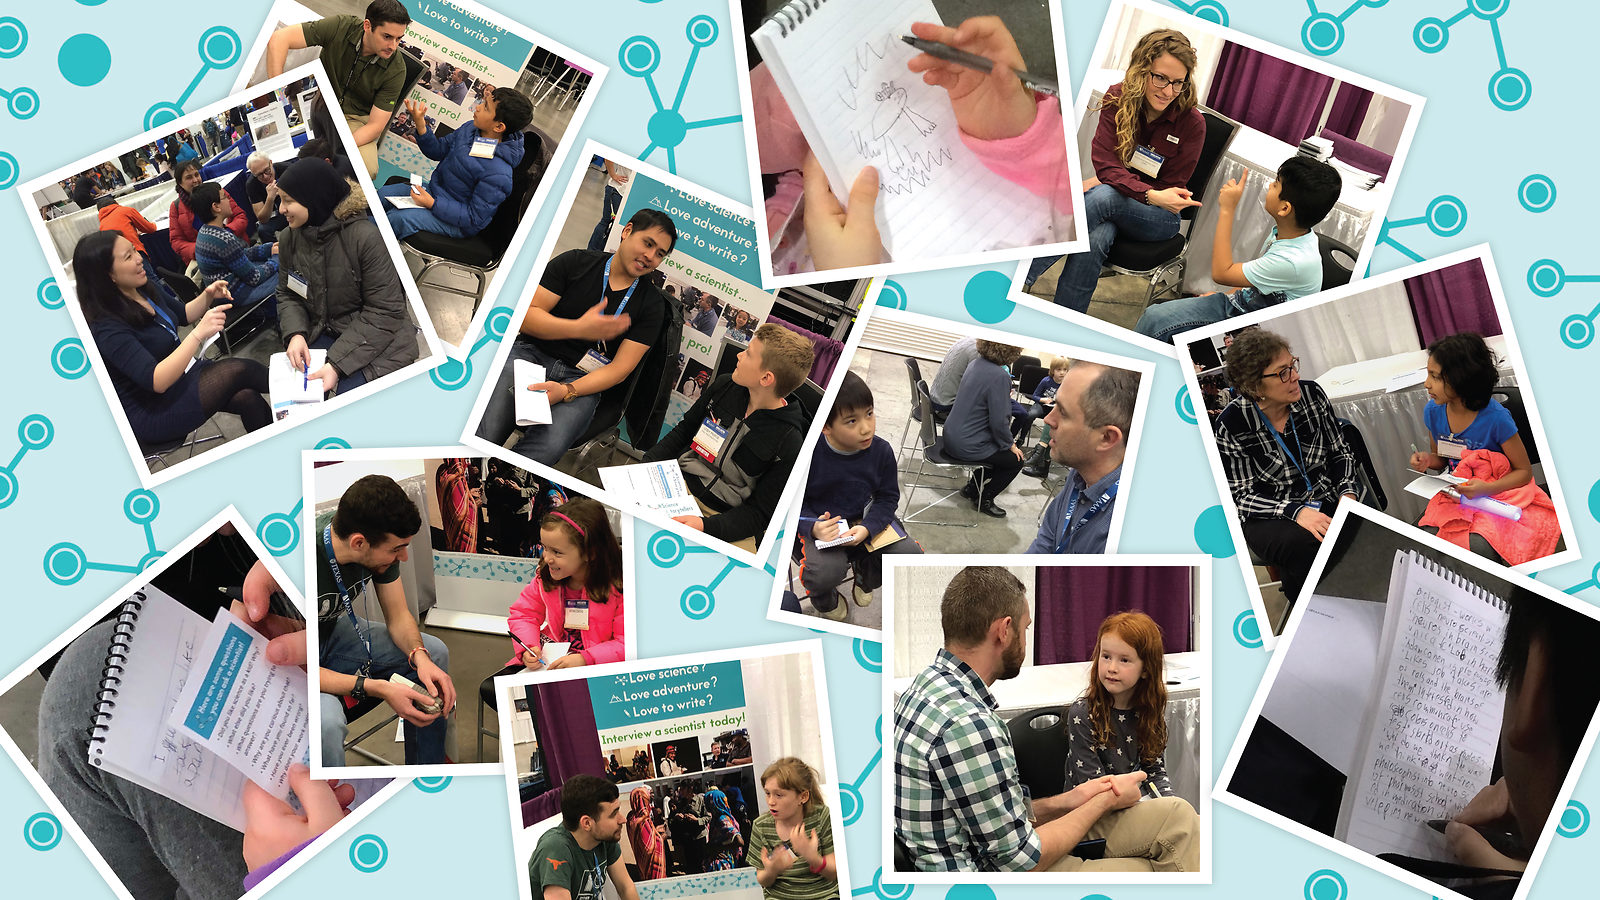 Collage of the Science Storytellers event